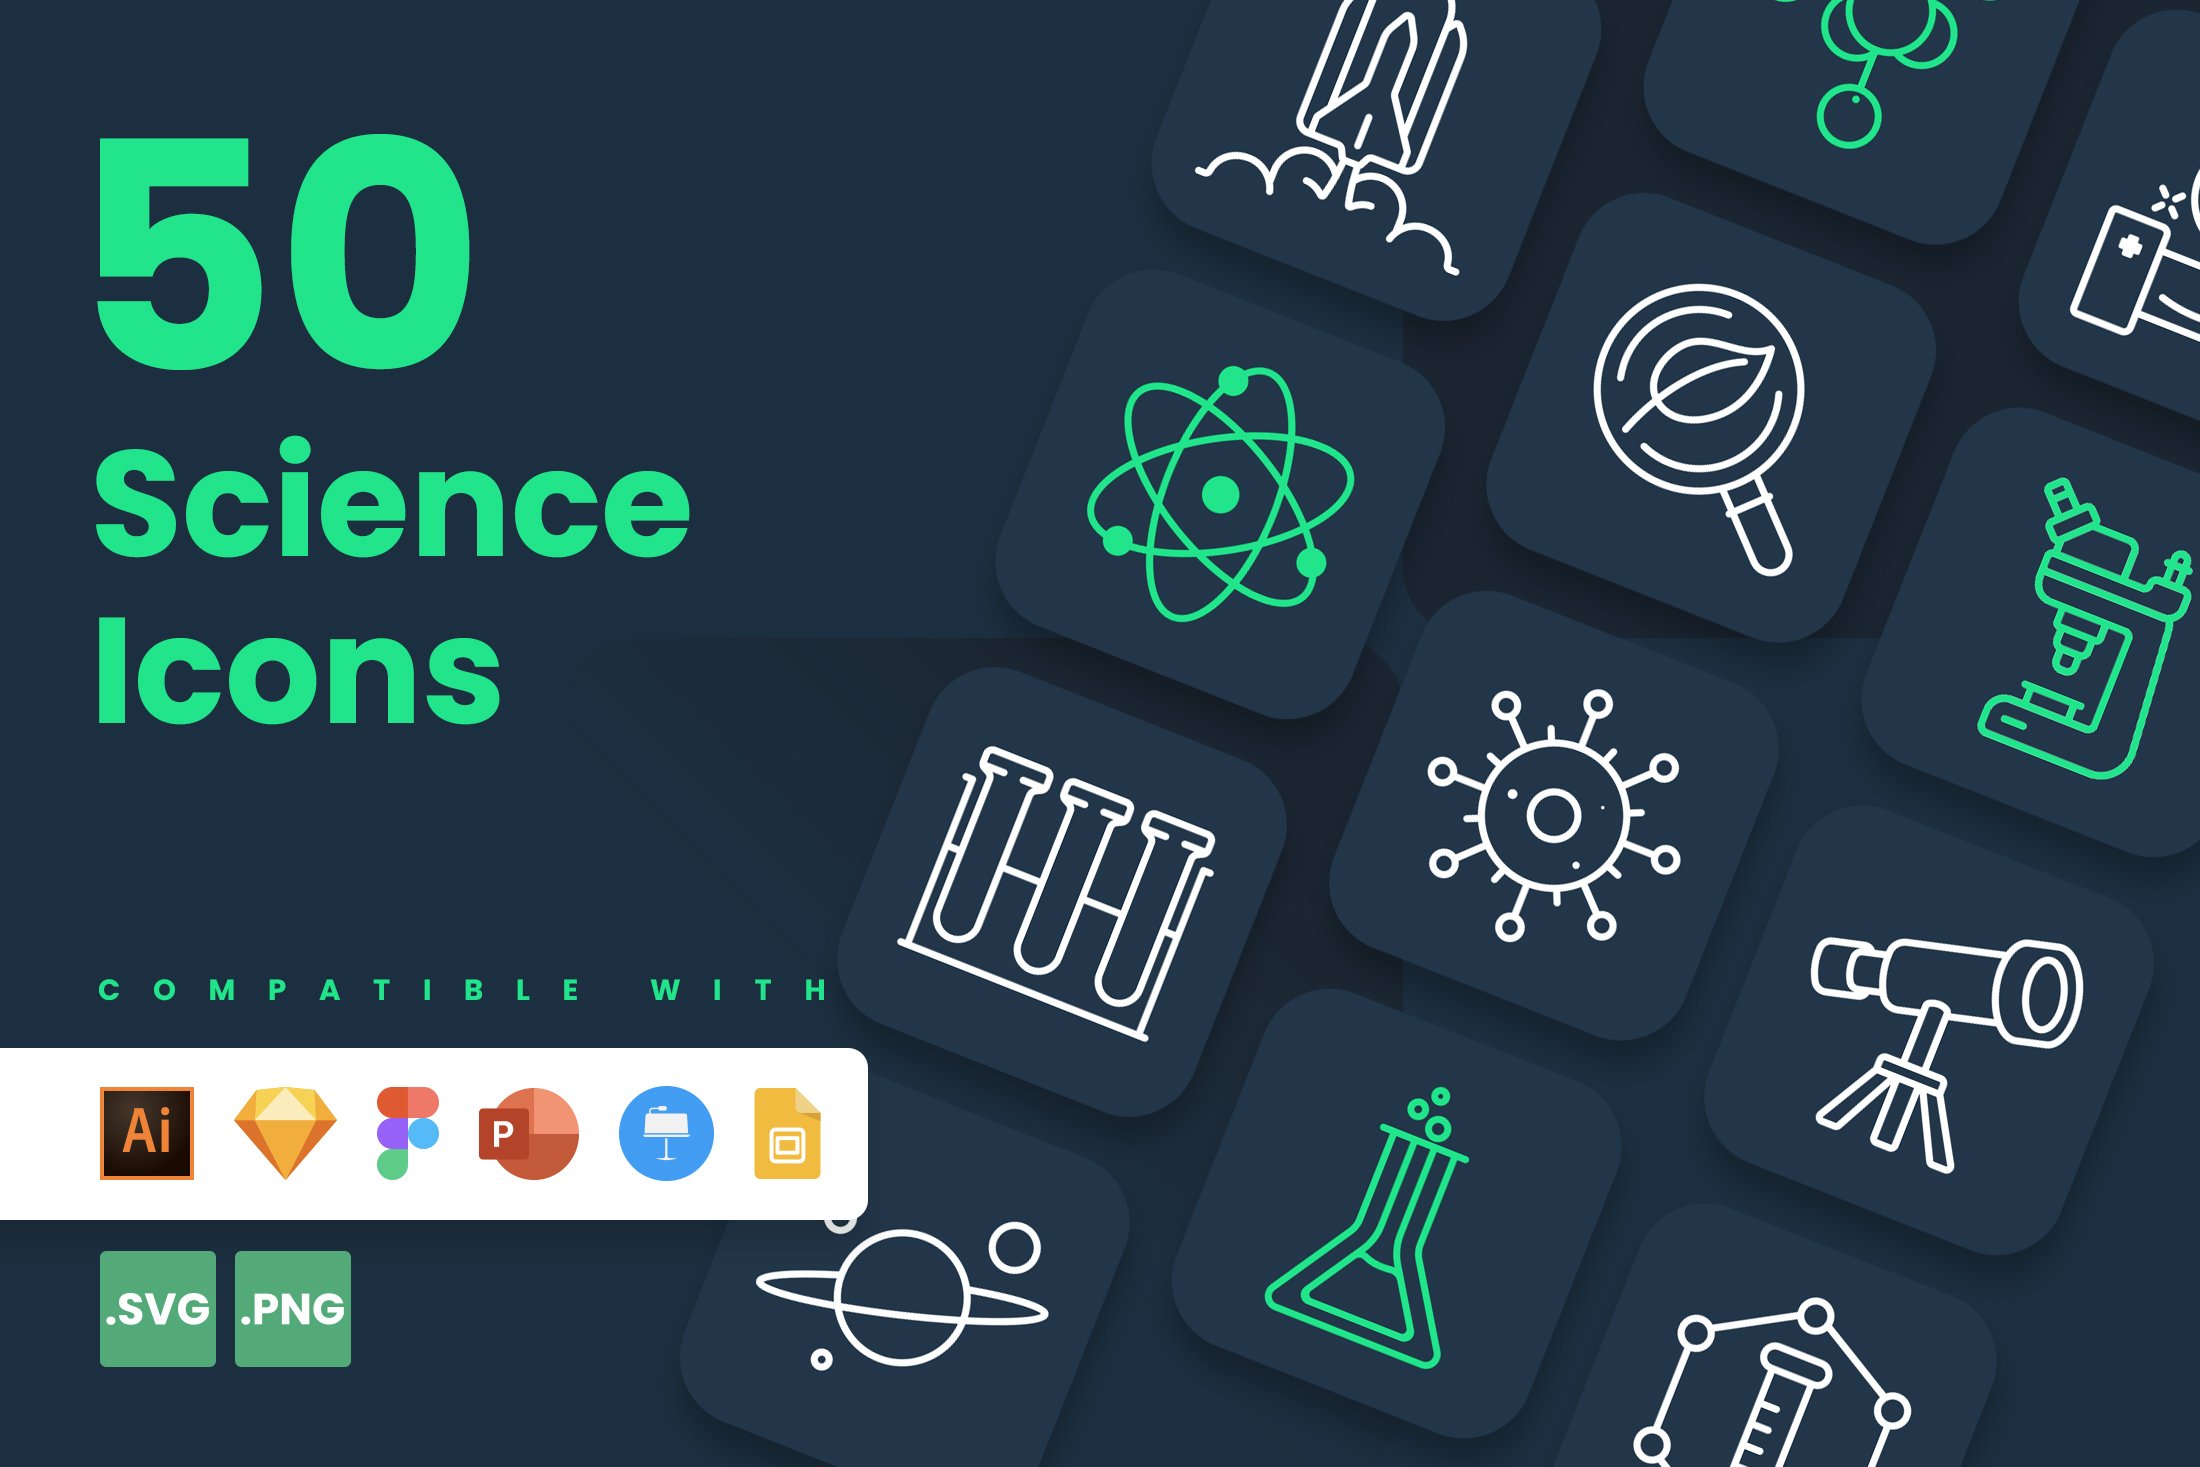 Science Icons cover image.